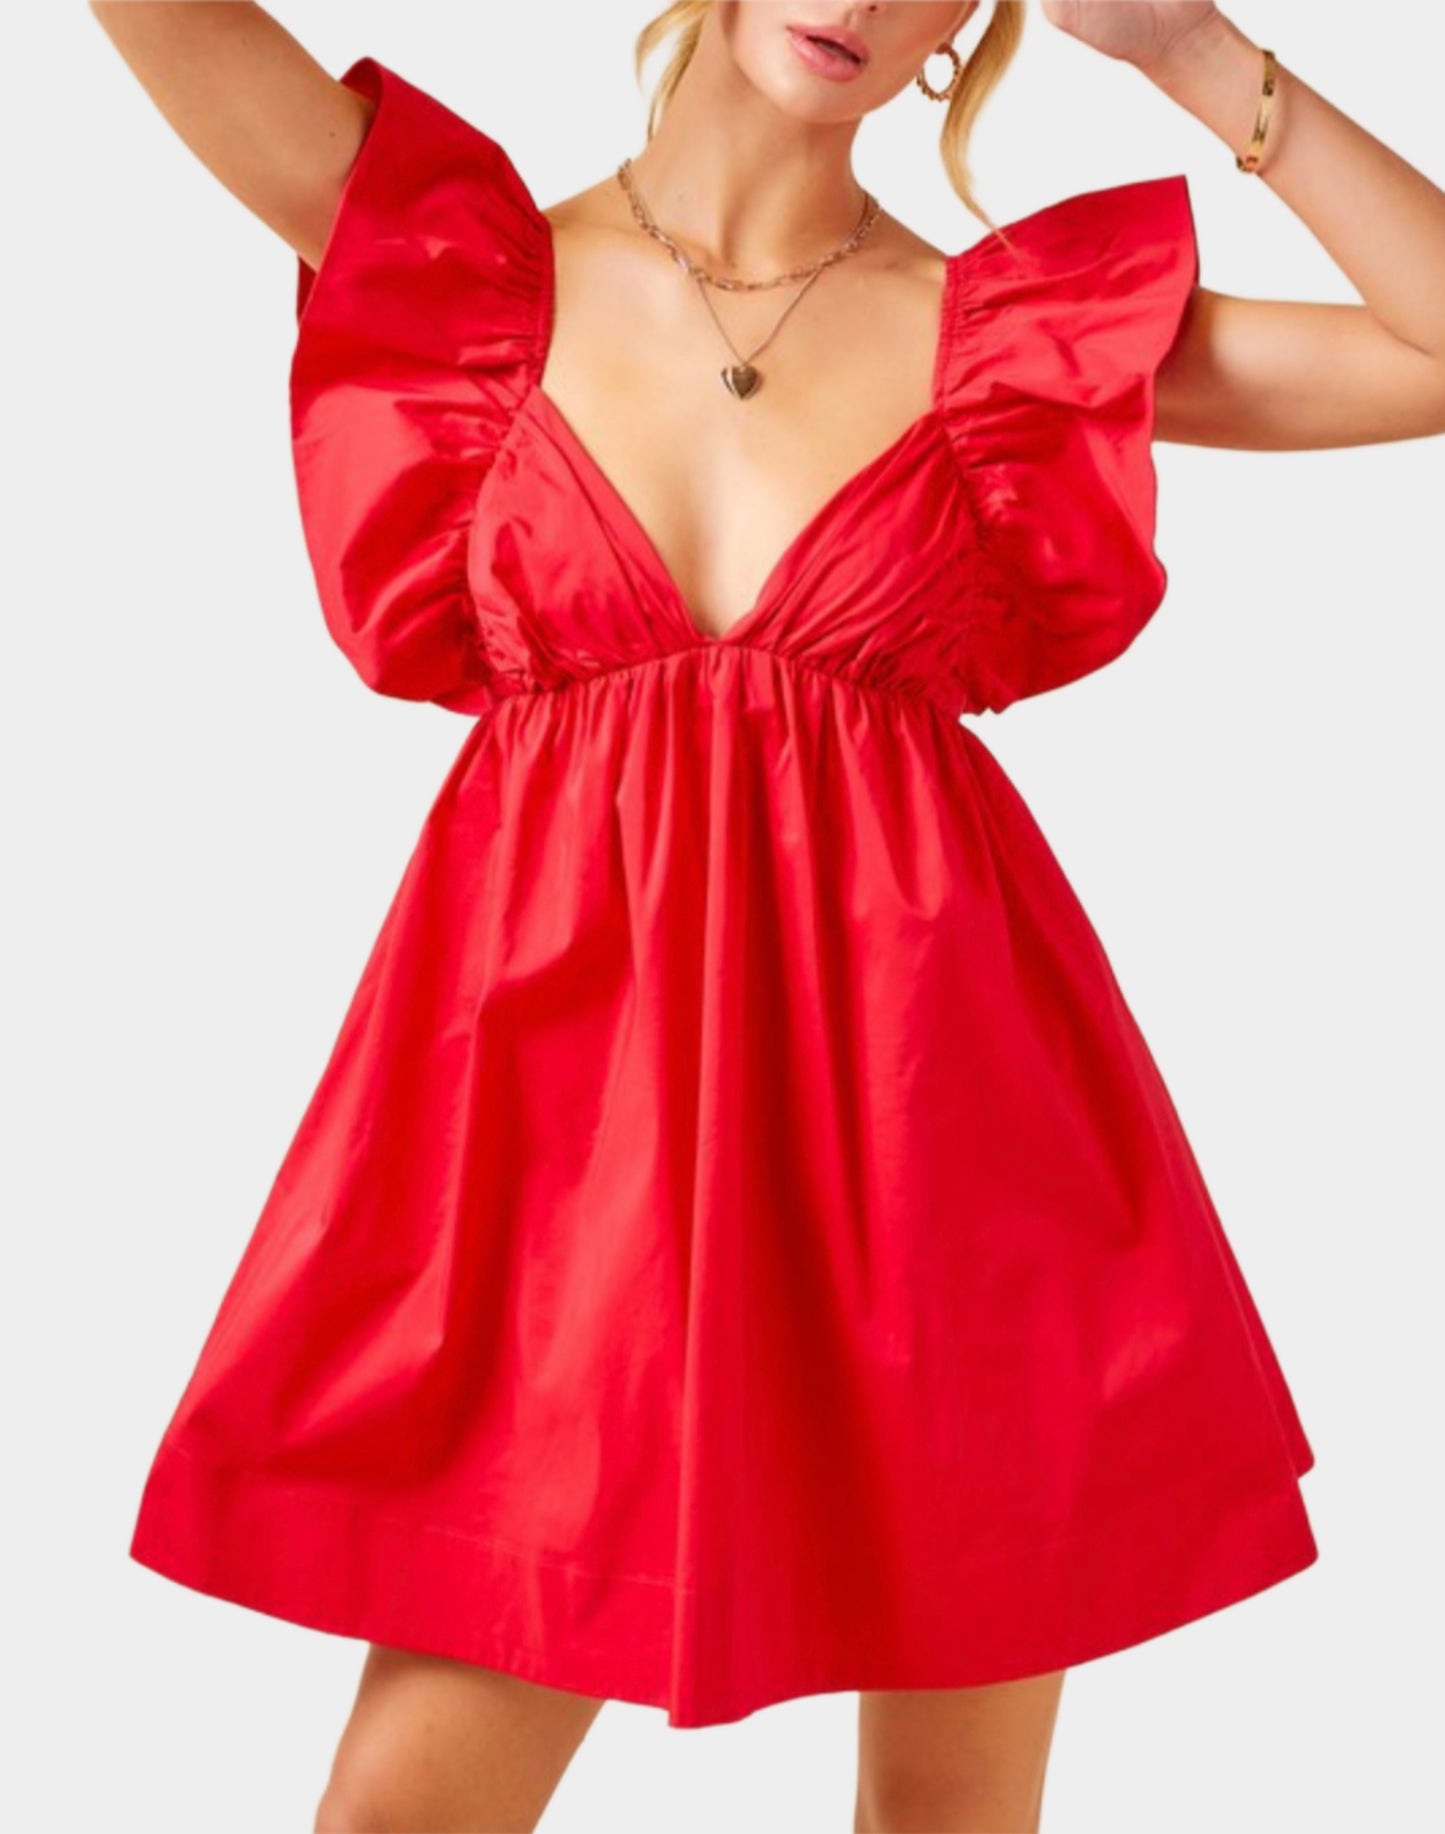 Oh, Darling Baby Doll Dress in Red